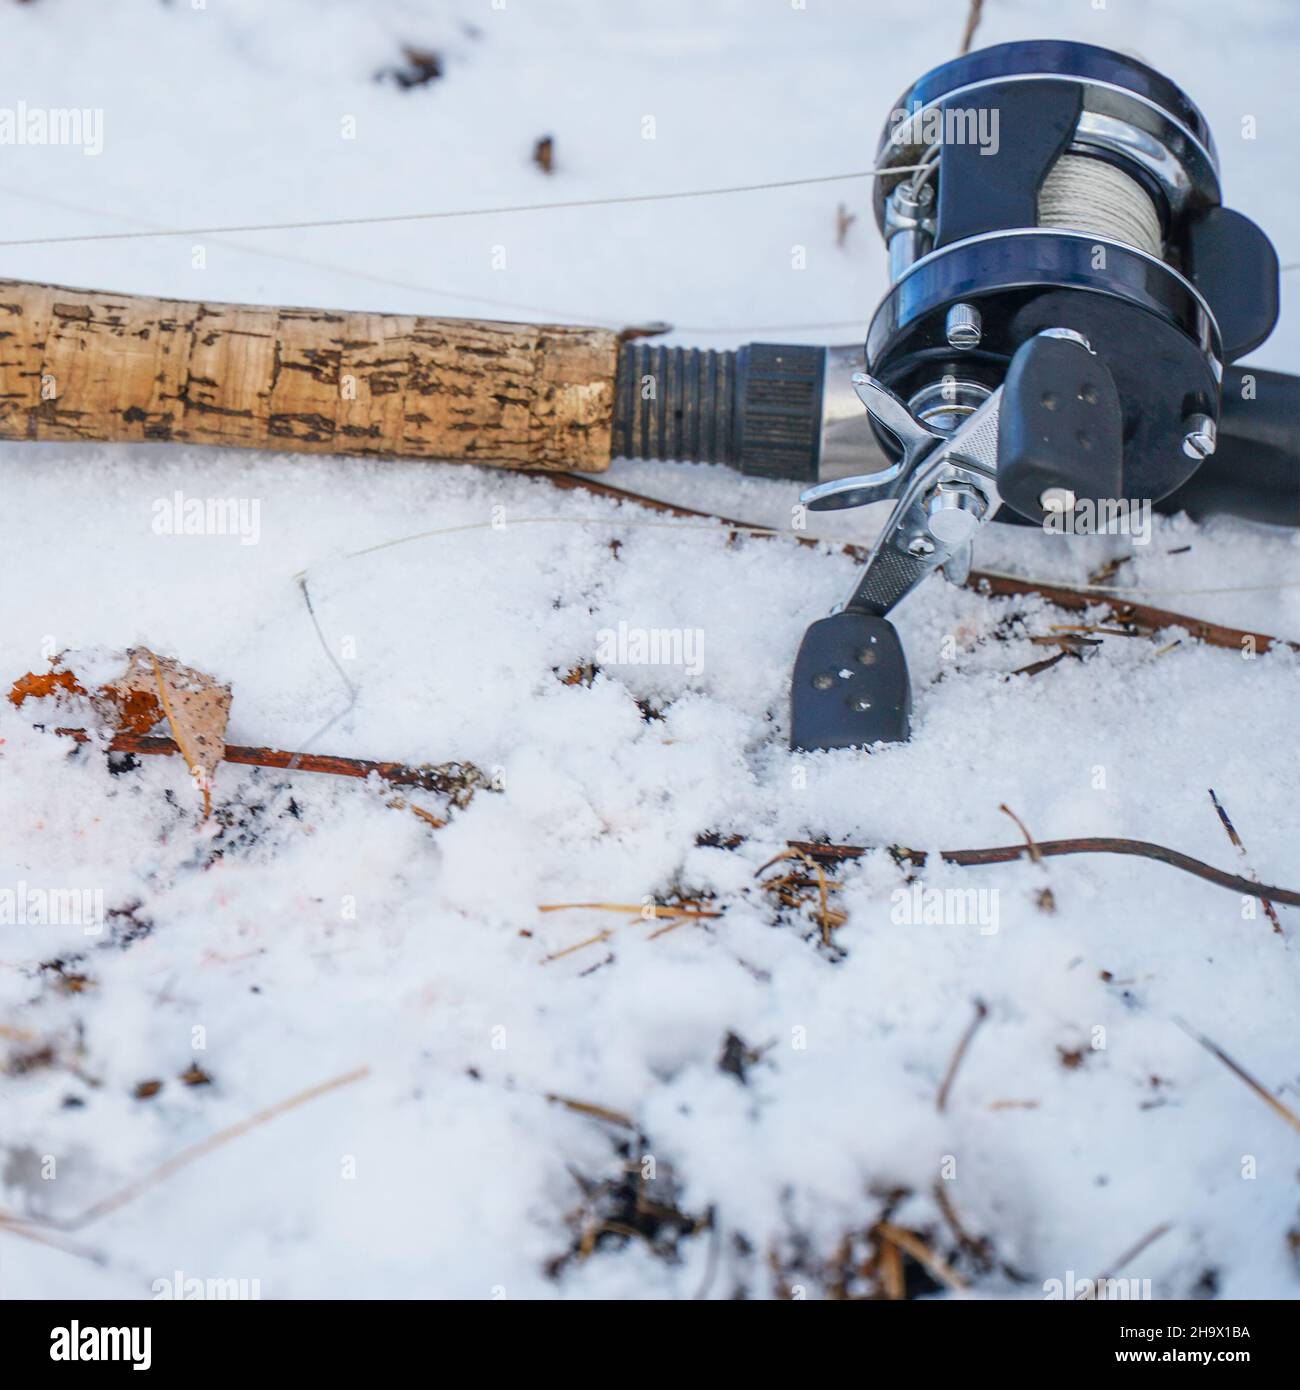 Spinning rod with baitcasting reel lying on the snow in the winter Stock Photo